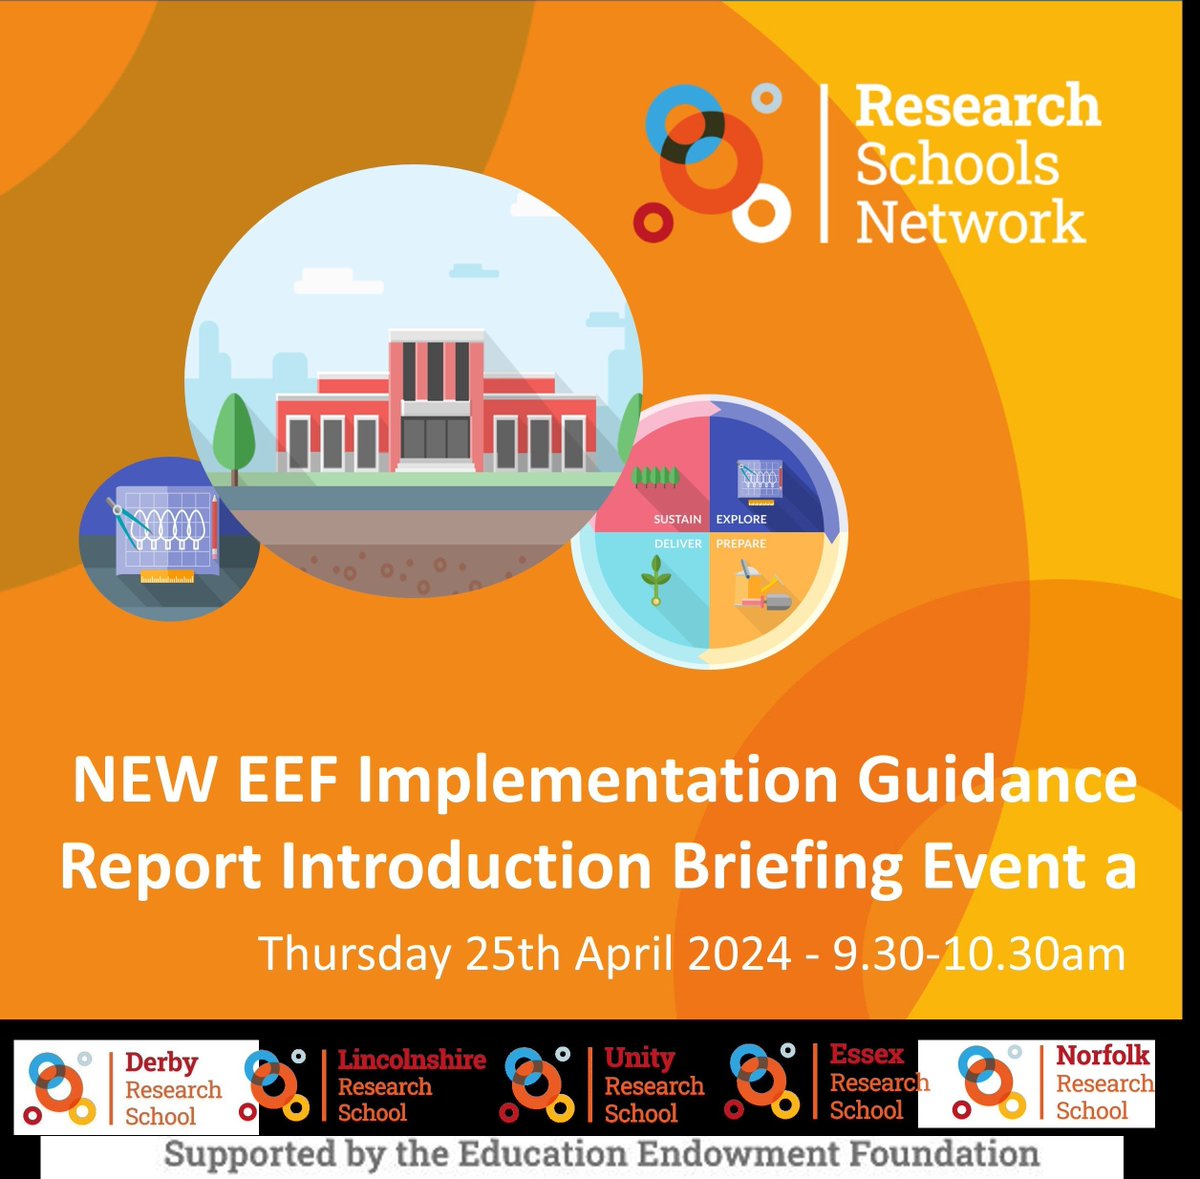 It's not too late to book on to the new @EducEndowFoundn Implementation Guidance Report Introduction Briefing Event which takes place at 09:30 today. This is the first in a series of webinars exploring this guidance. Book here - buff.ly/3JtYuT9